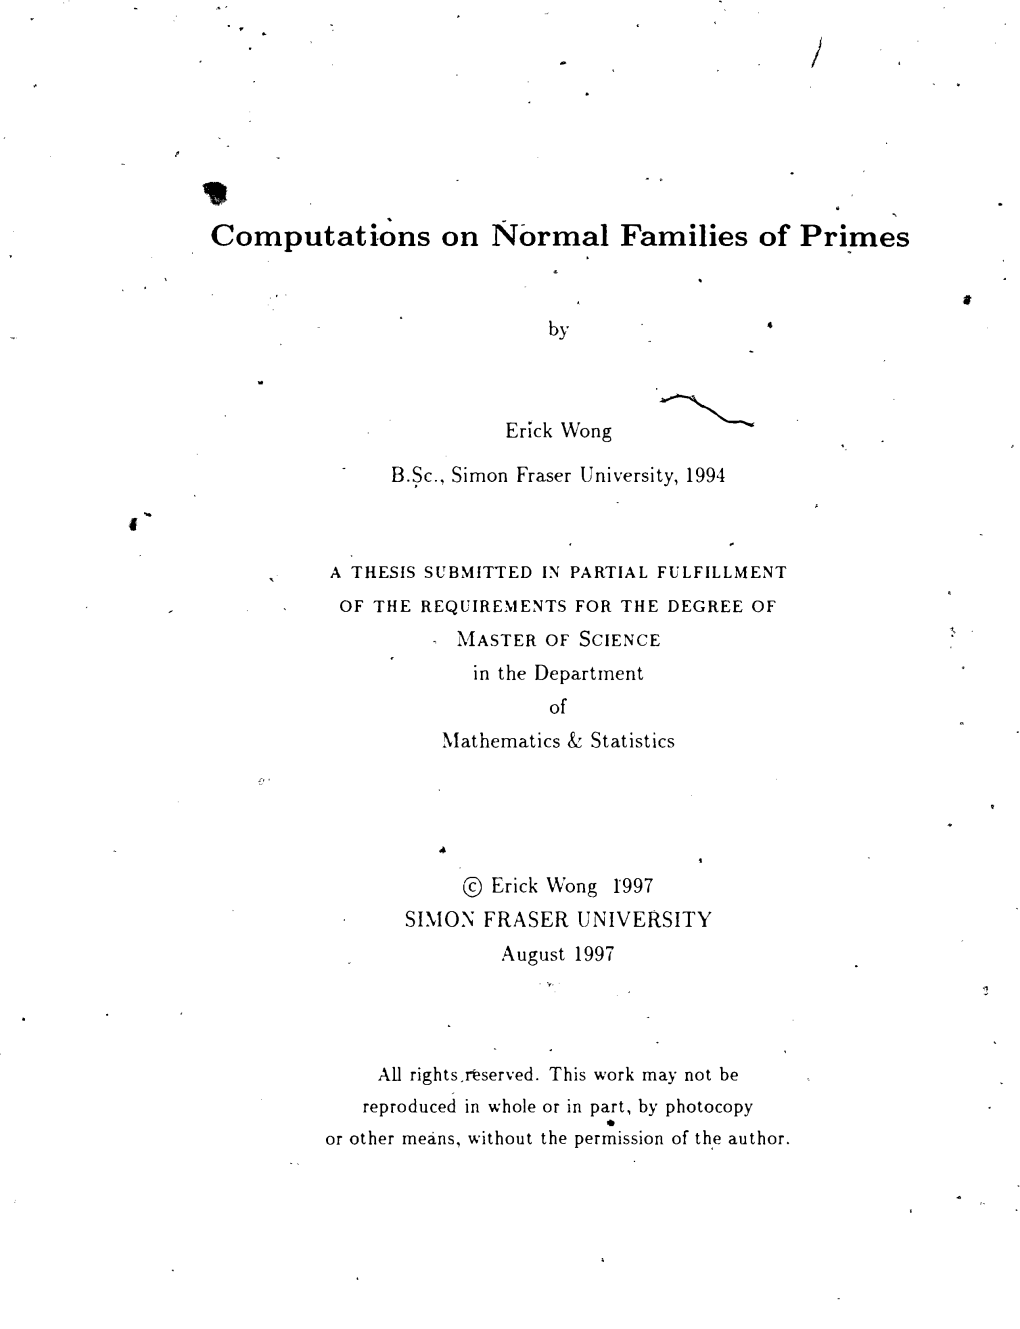 Computations on Normal Families of Primes